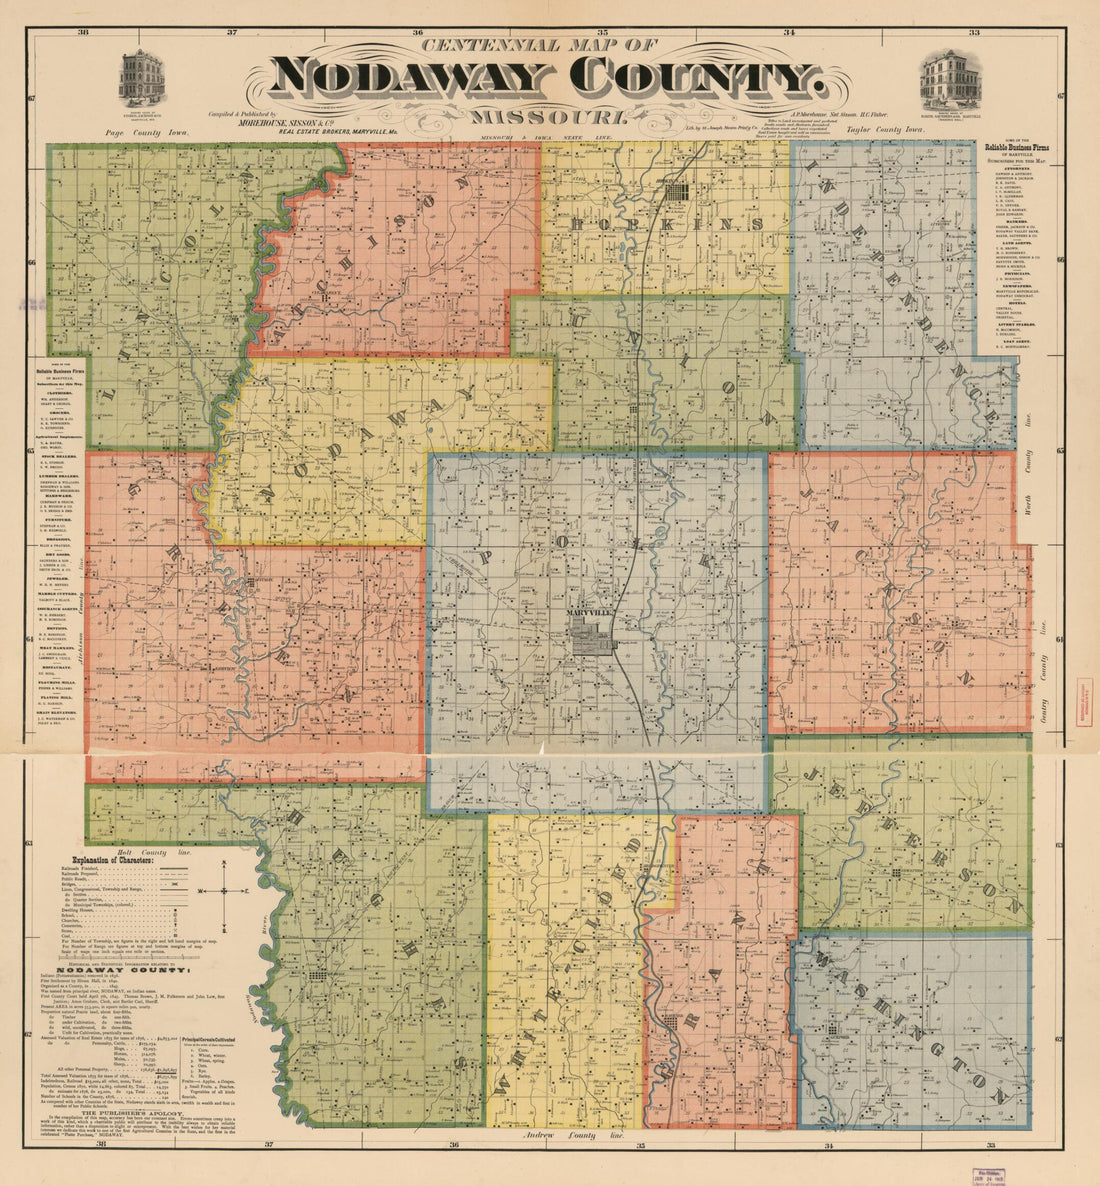 This old map of Centennial Map of Nodaway County, Missouri from 1900 was created by Sisson &amp; Co Morehouse in 1900